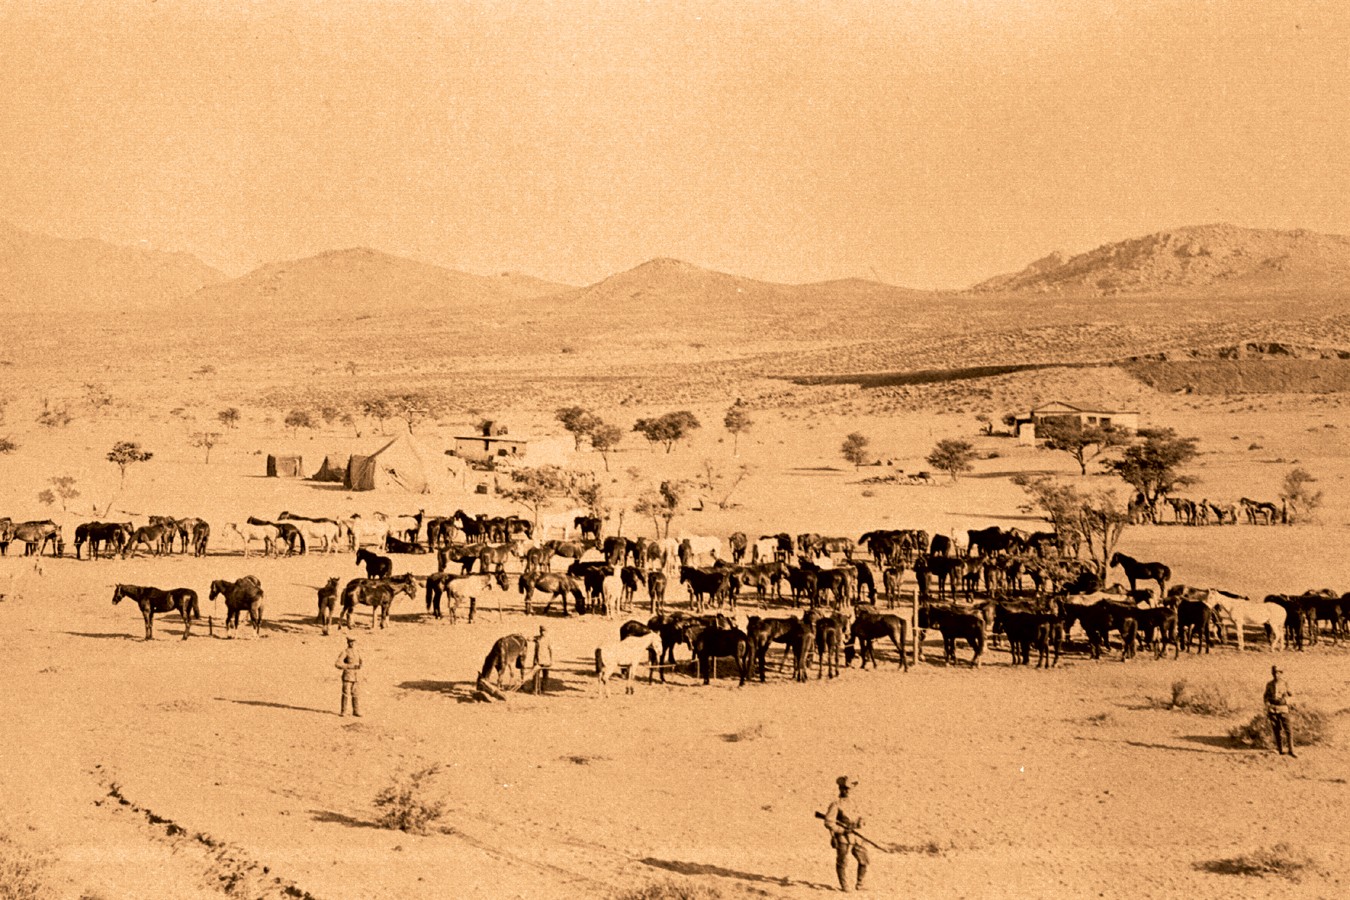 Horses of the German colonial forces near the city Aus. Source: National Archive of Namibia